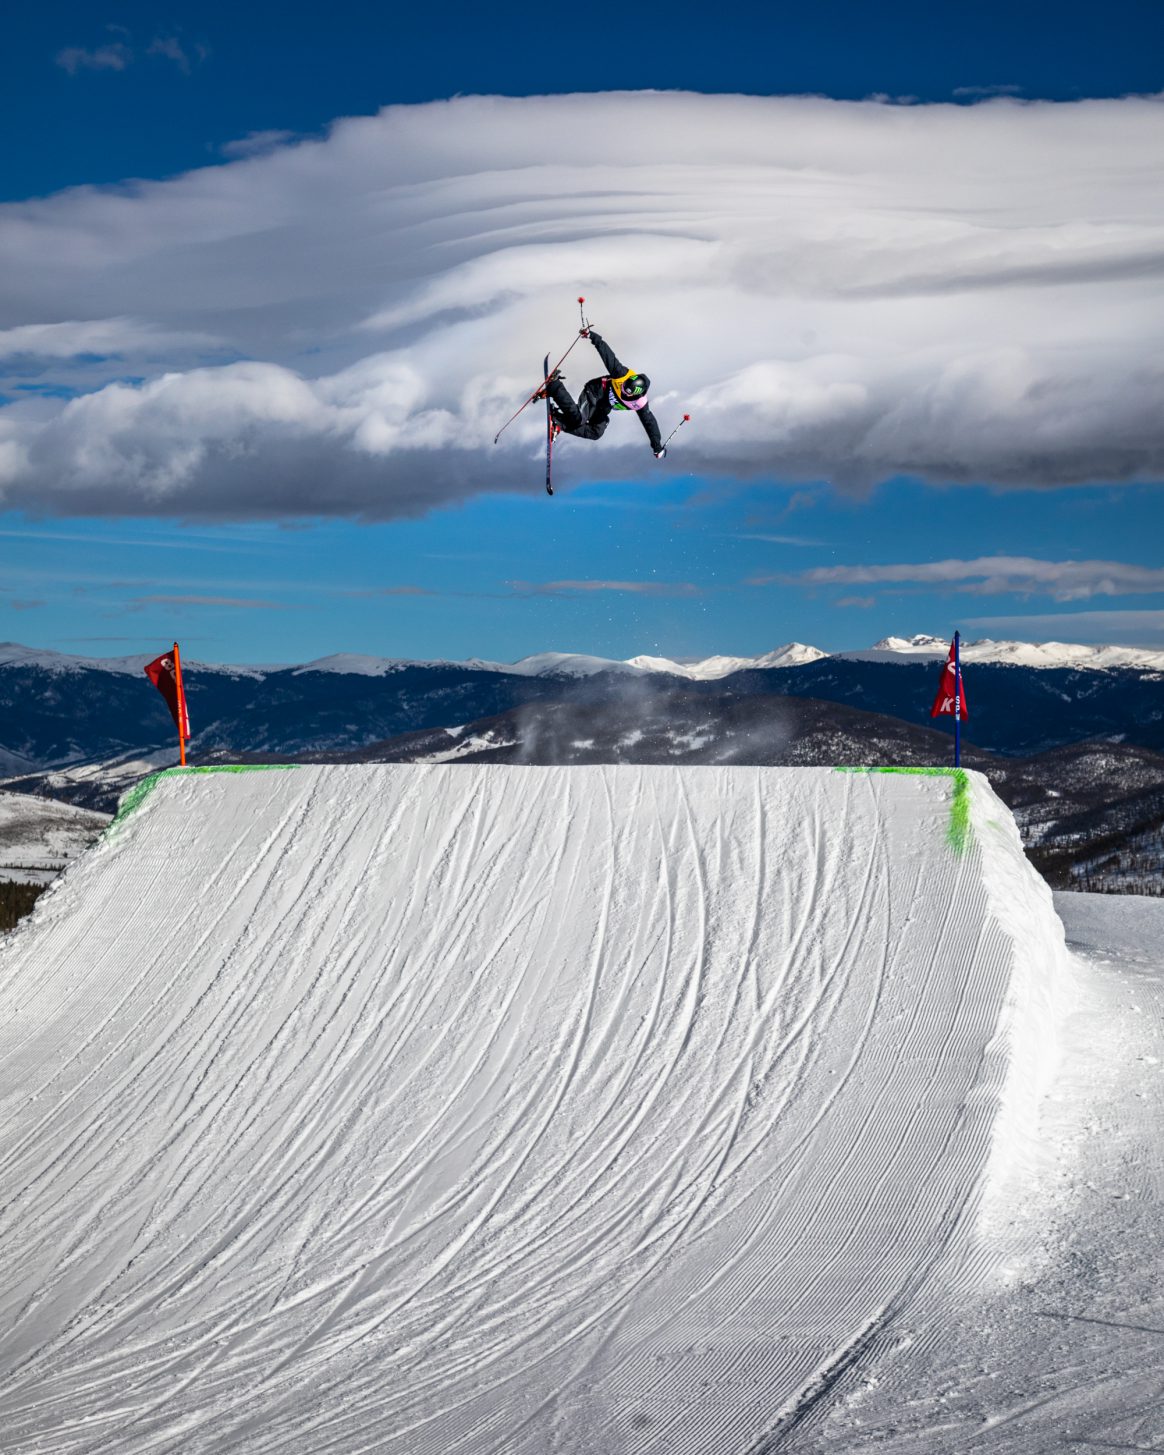 Gus Kenworthy warms up on the slopestyle course at the 2018 Winter Dew Tour in Breckenridge, Colorado.